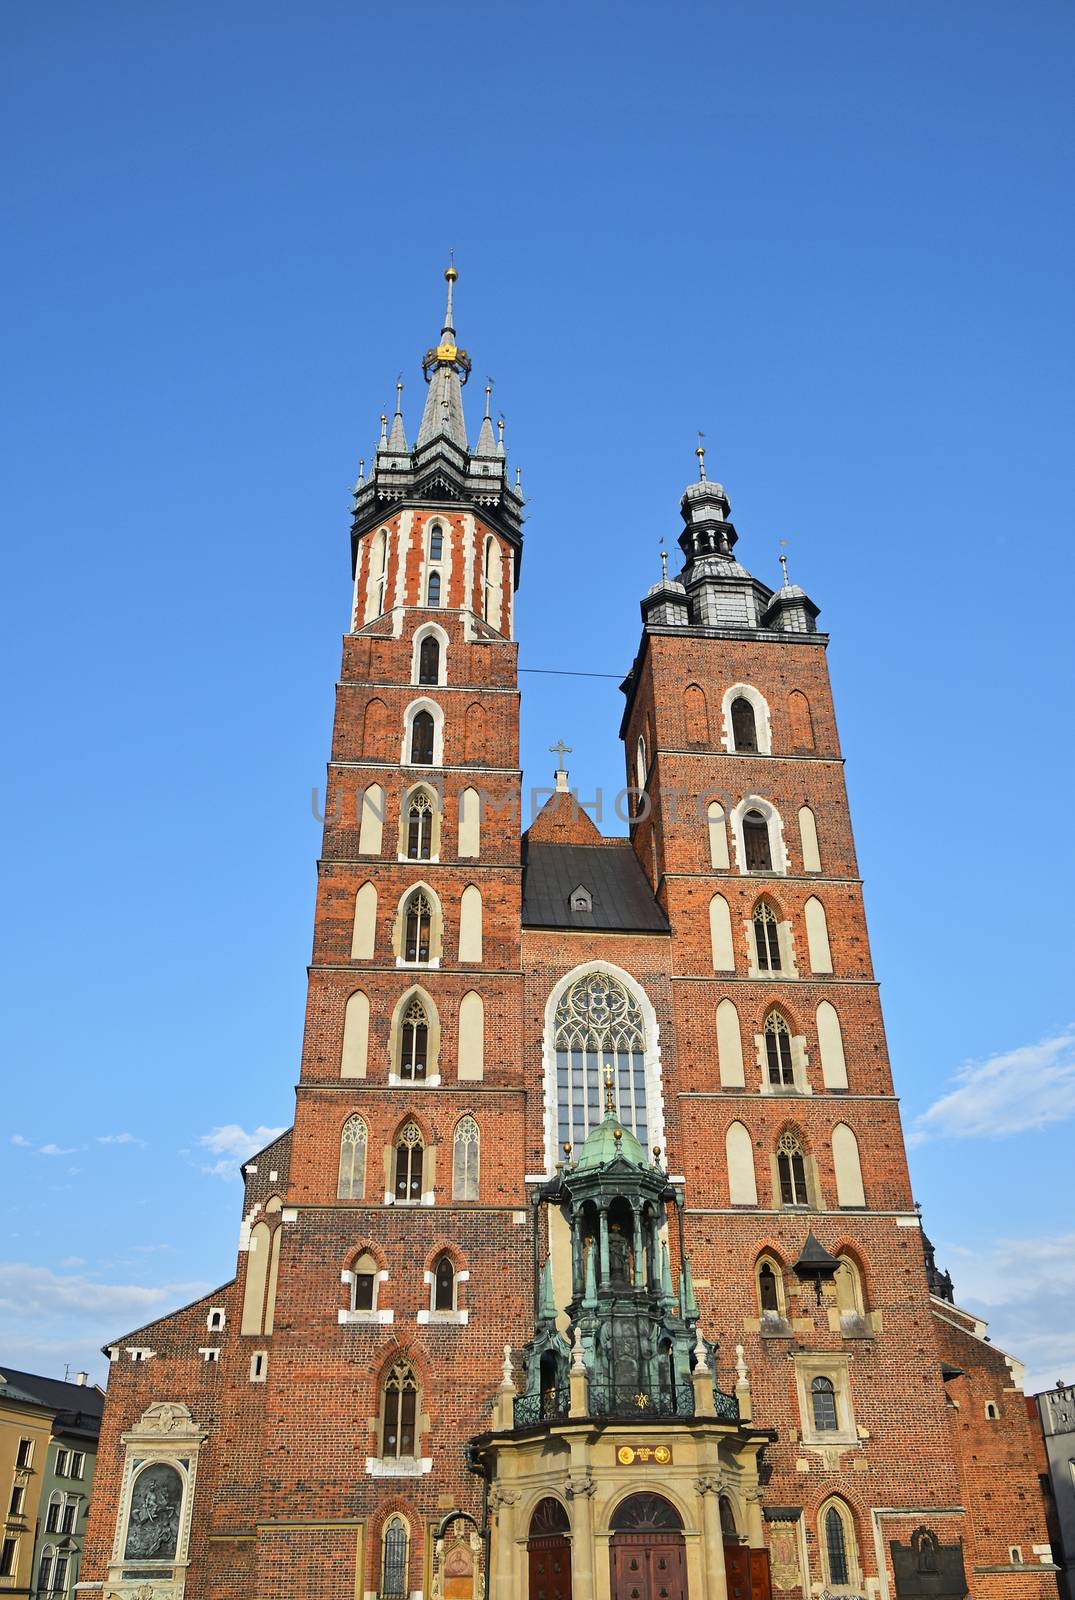 Church of Our Lady Assumed into Heaven (Saint Mary Church), a Brick Gothic church at Main Market Square in Krakow, Poland